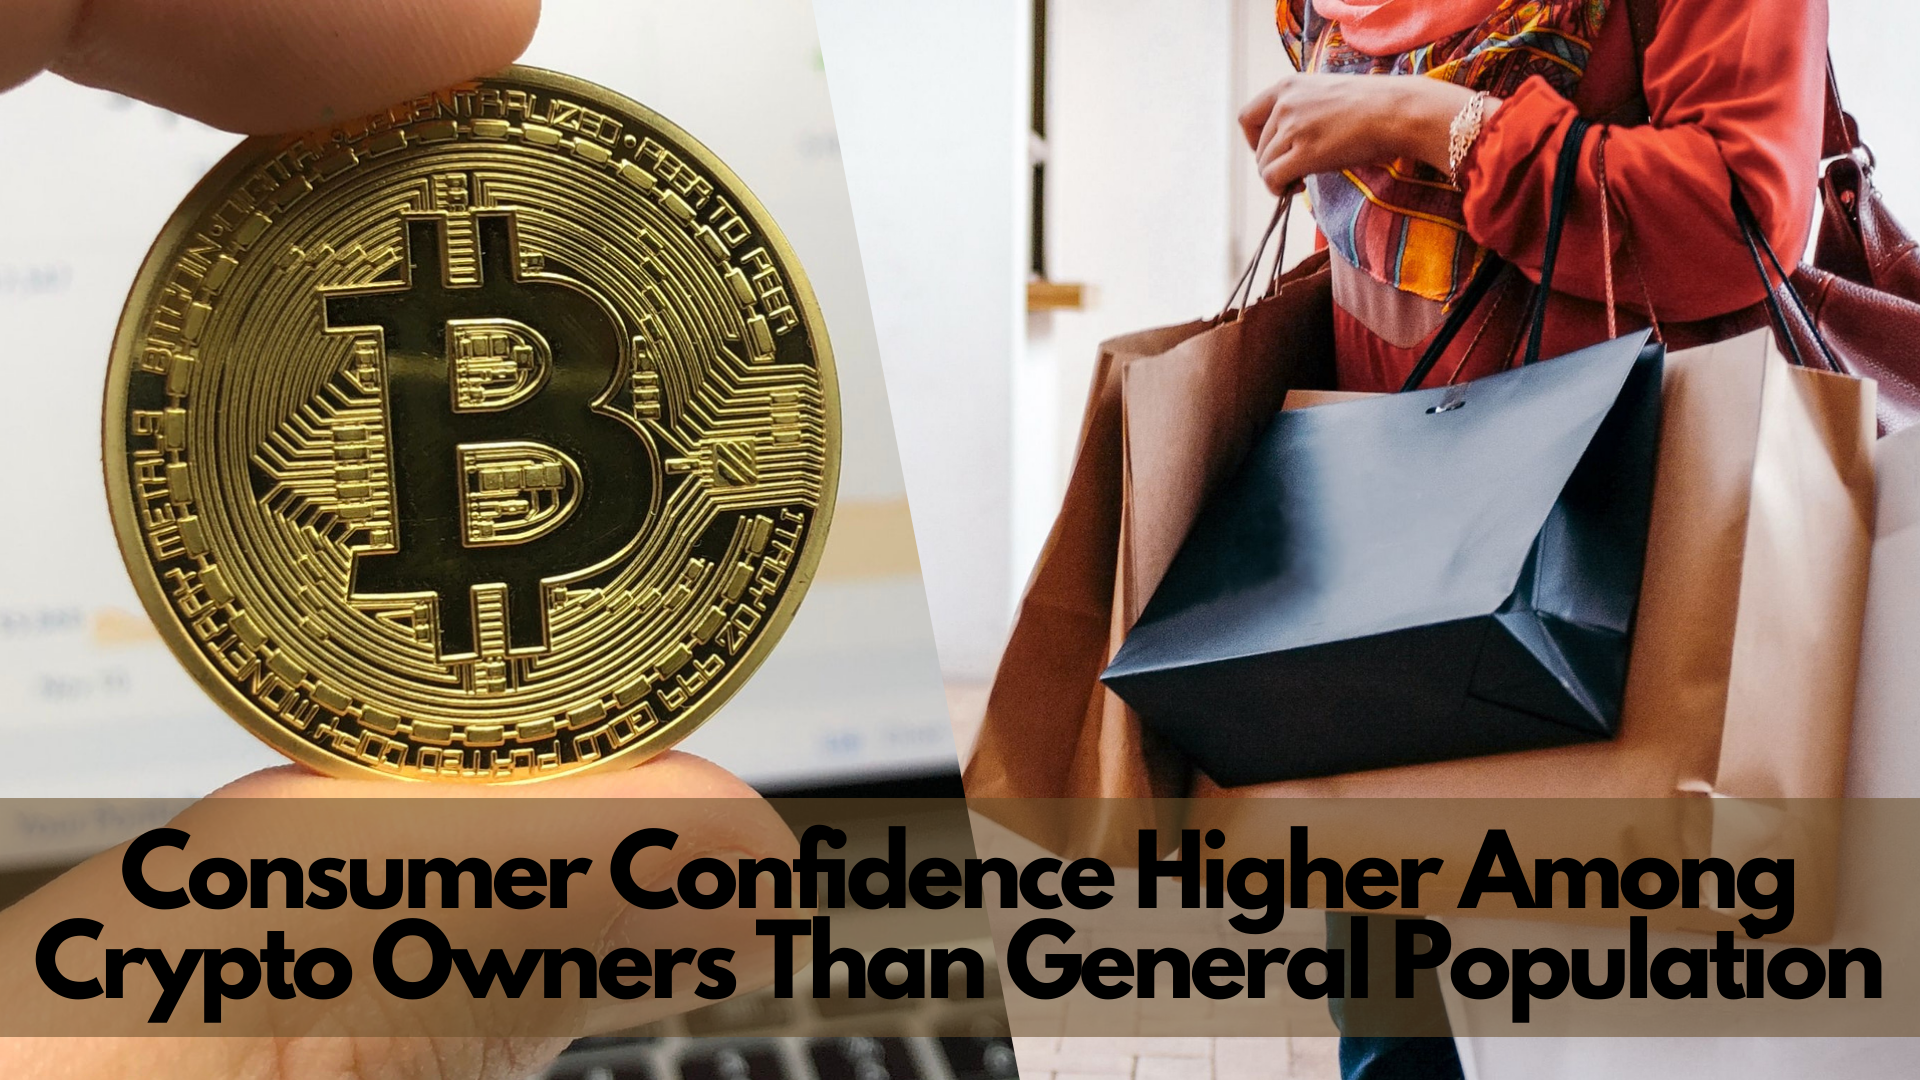 Consumer Confidence Higher Among Crypto Owners Than General Population